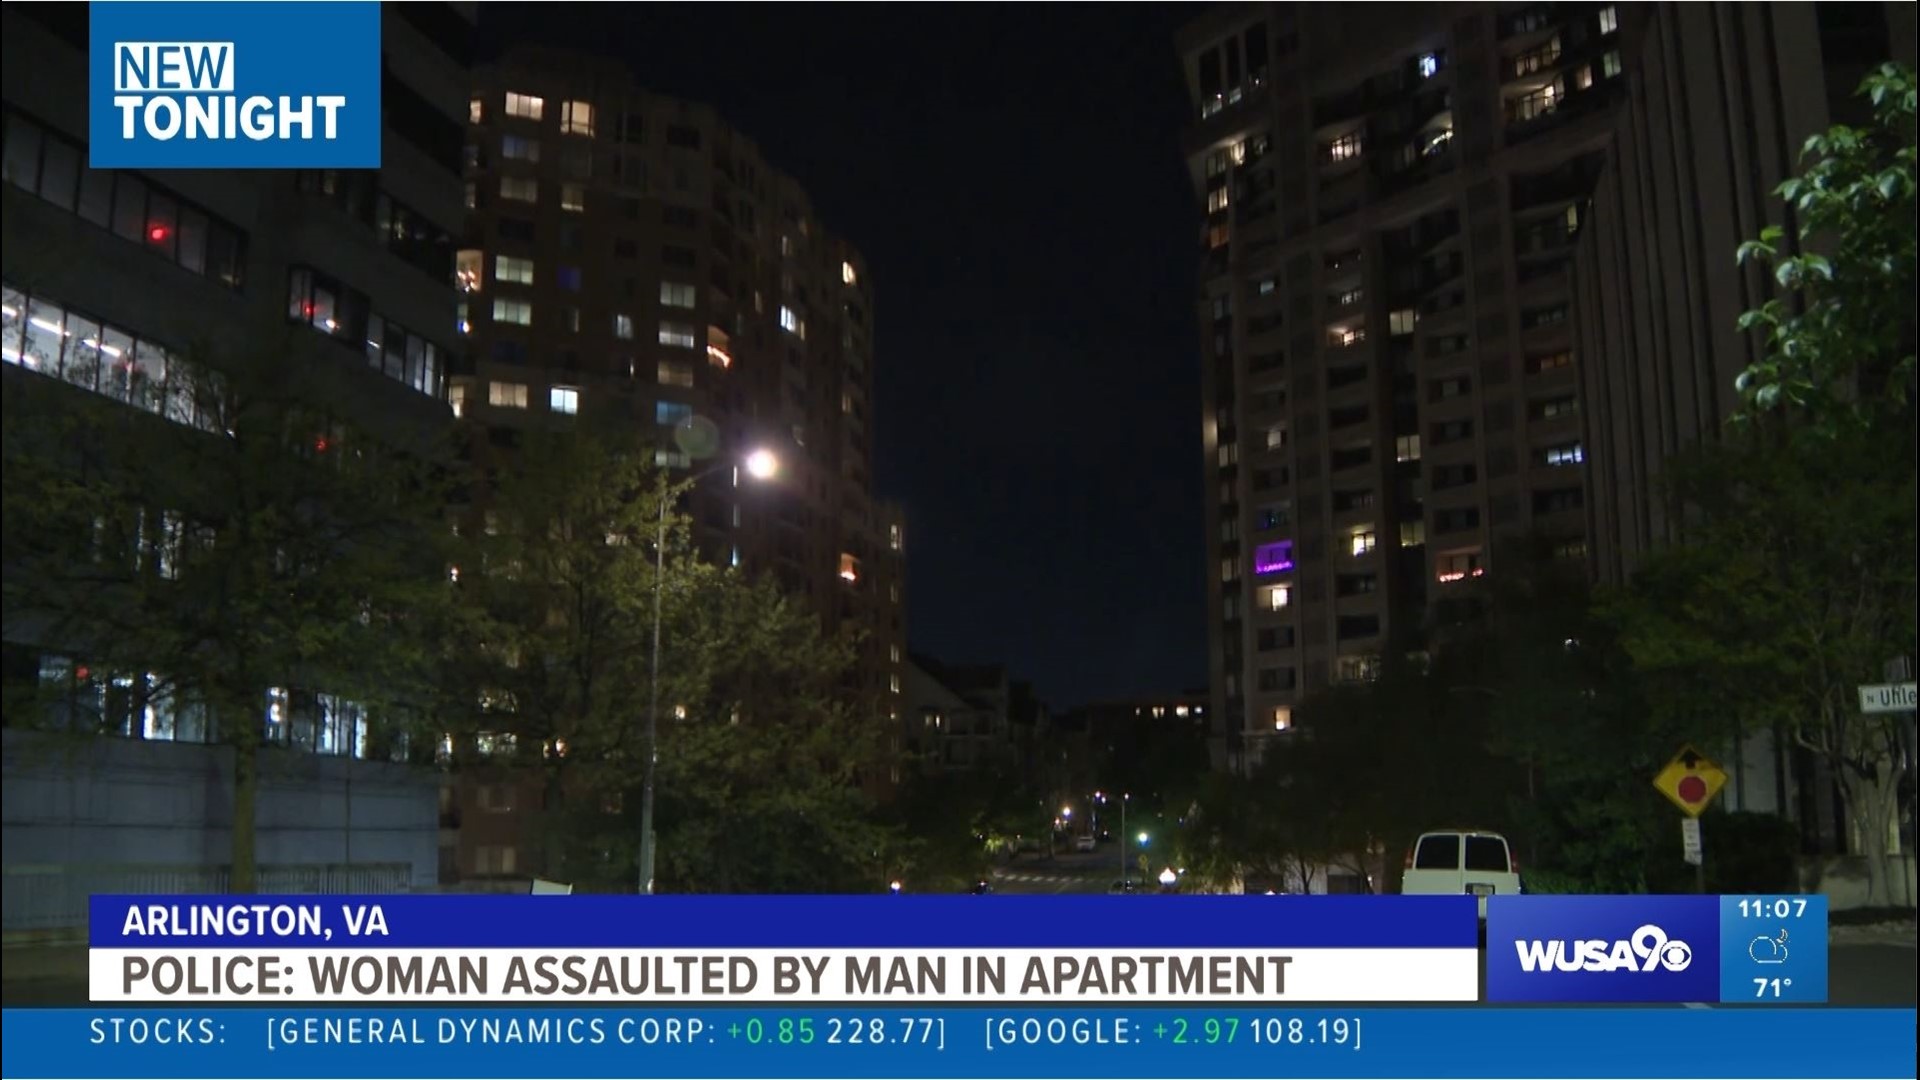 Police are investigating after a man was able to get into a woman's home before sexually assaulting her in Arlington early Wednesday morning.